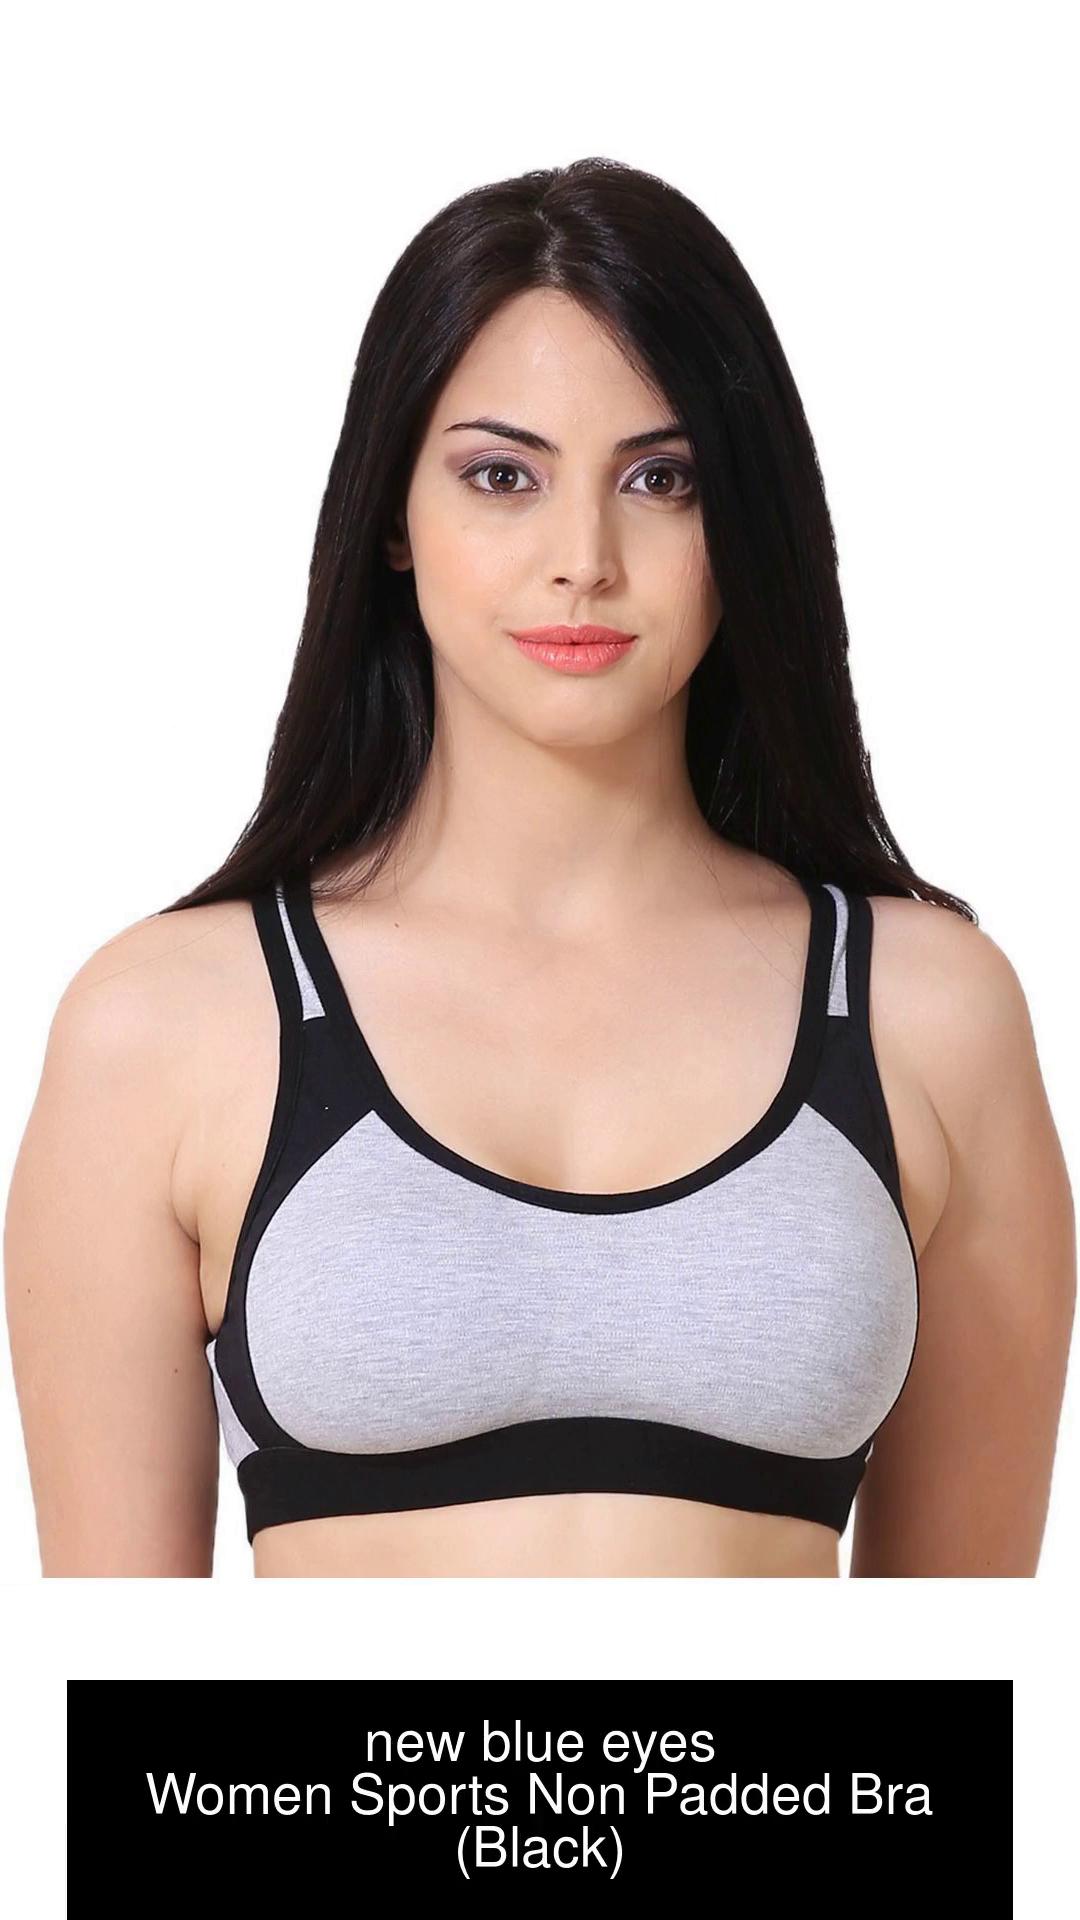 new blue eyes Women Sports Non Padded Bra - Buy new blue eyes Women Sports  Non Padded Bra Online at Best Prices in India